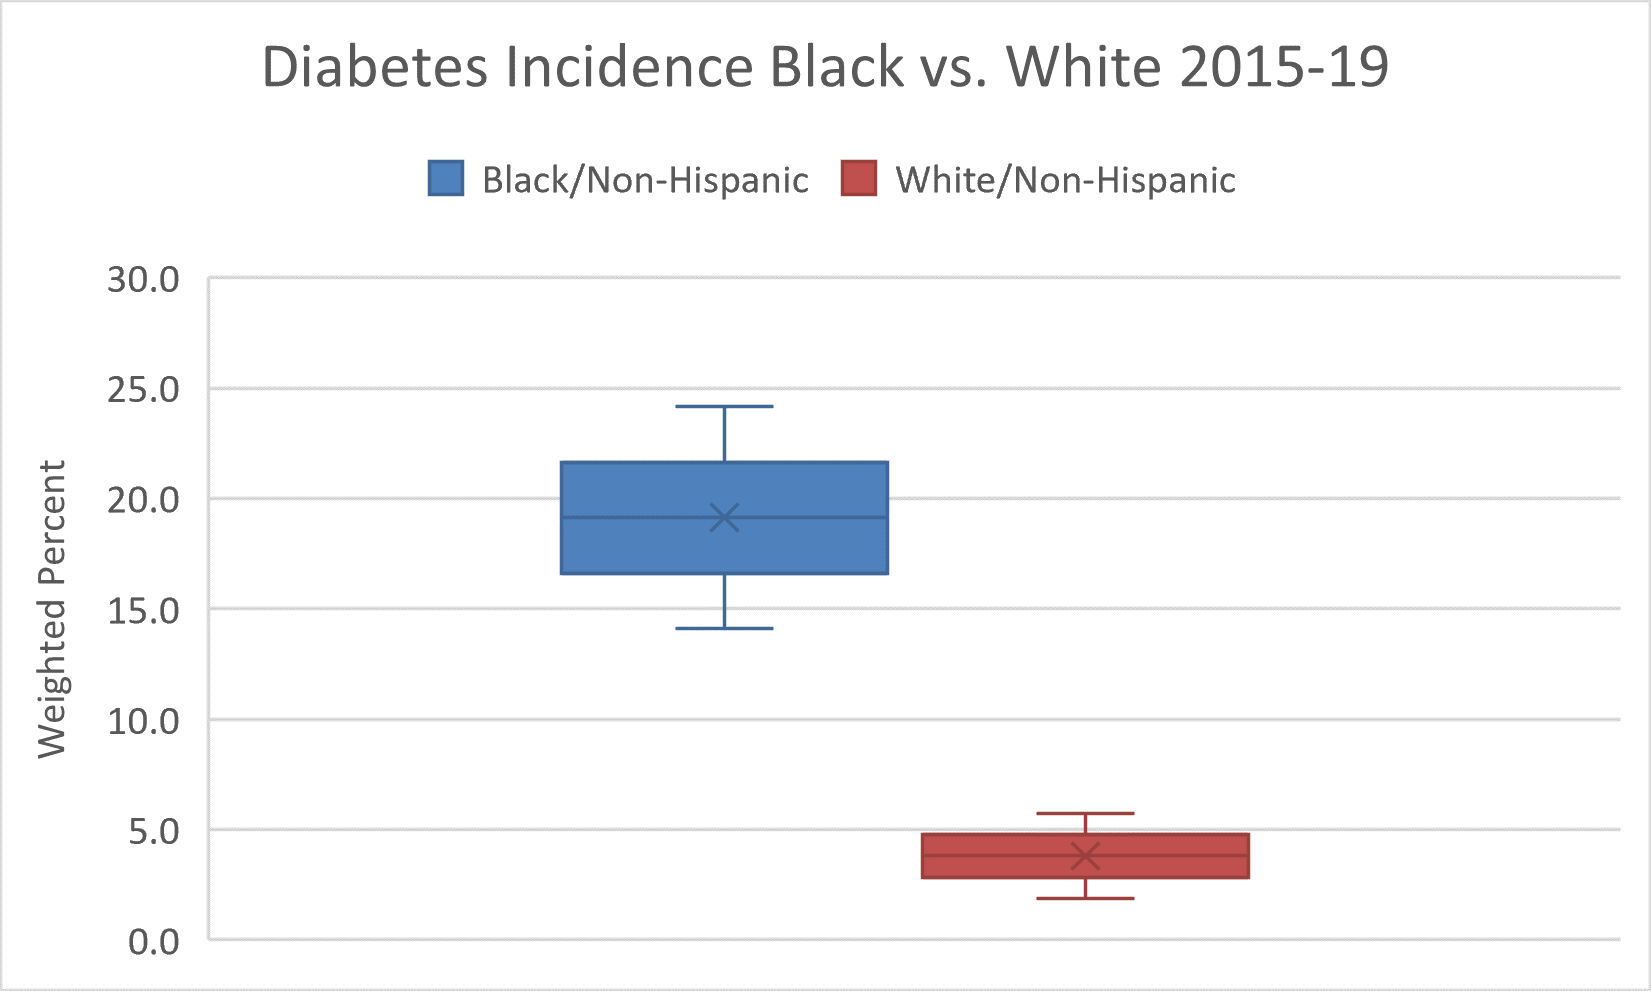 Box and whisker plot showing that Blacks have higher incidence rates of diabetes than Whites from 2015-2019.